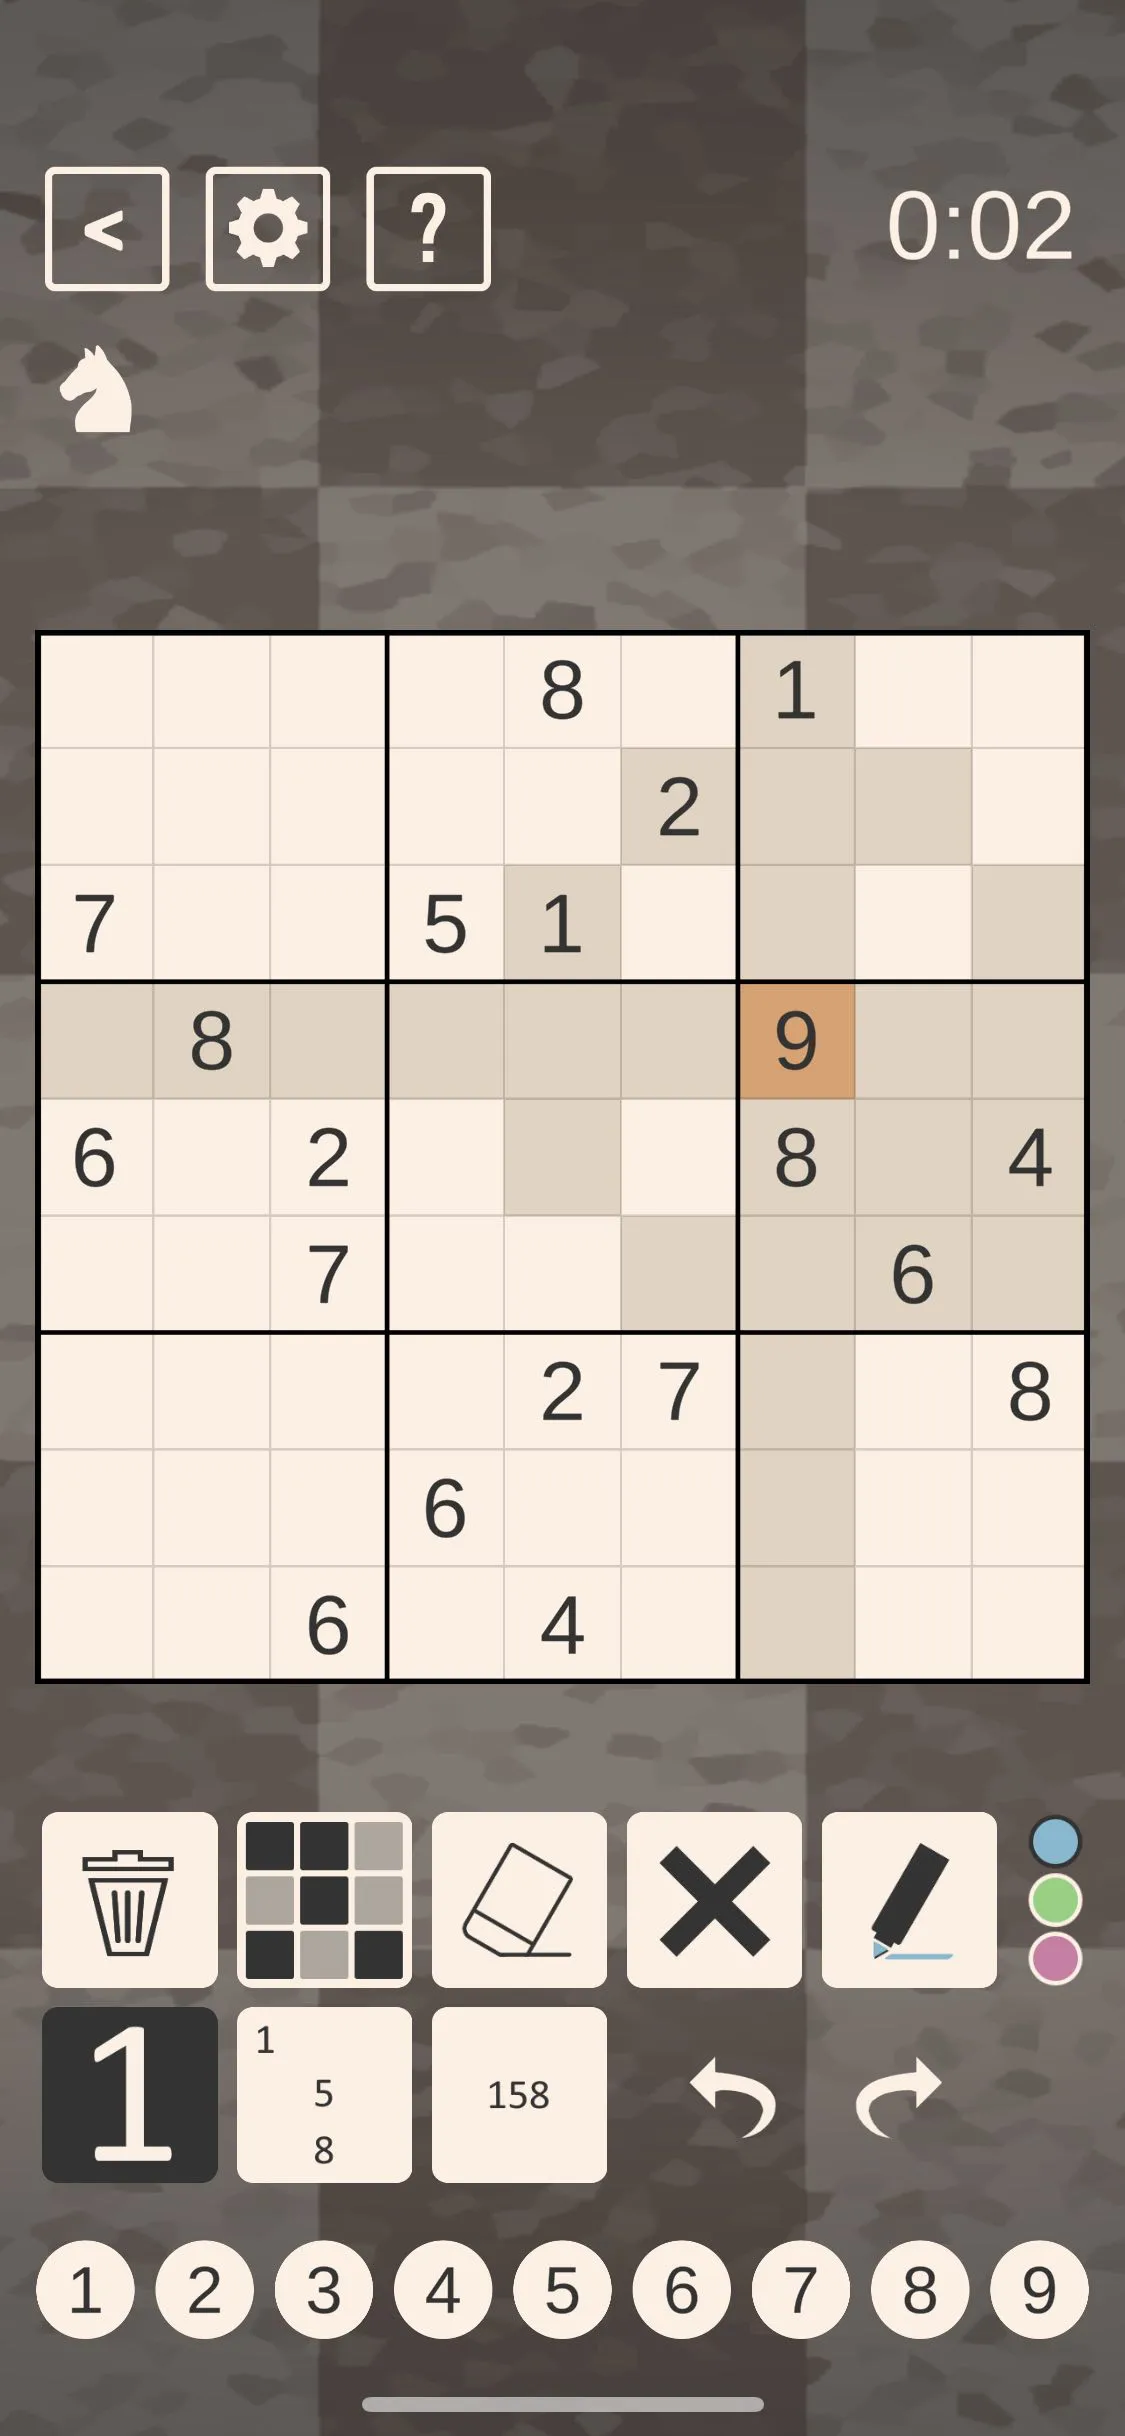 The Chess Sudoku Screen with 9 Highlighted in the 3rd house (top left).